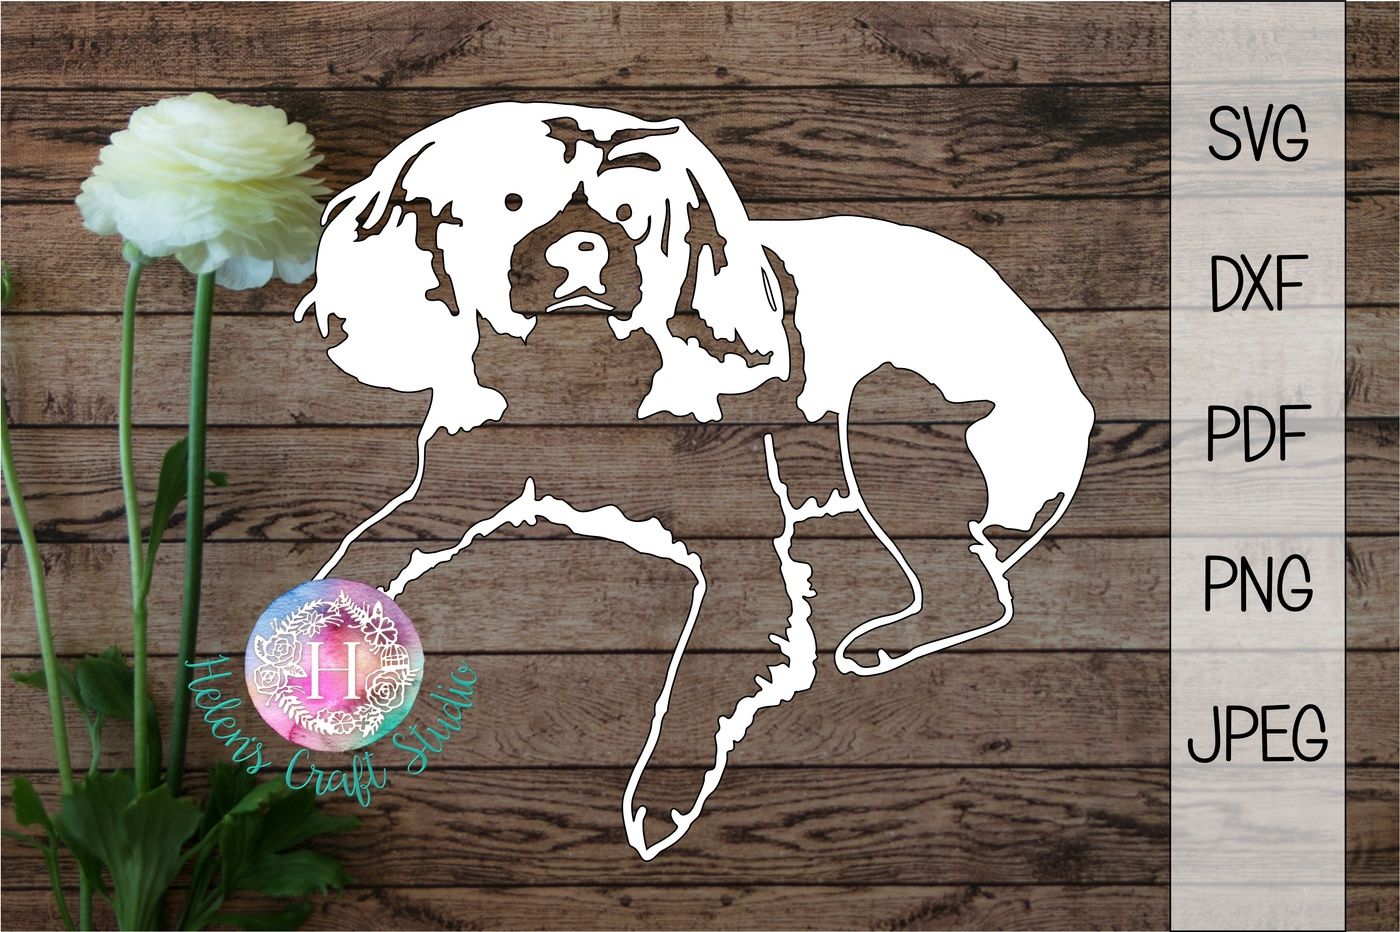 Cavalier King Charles Spaniel SVG, DXF, PDF, PNF and JPEG By Helens